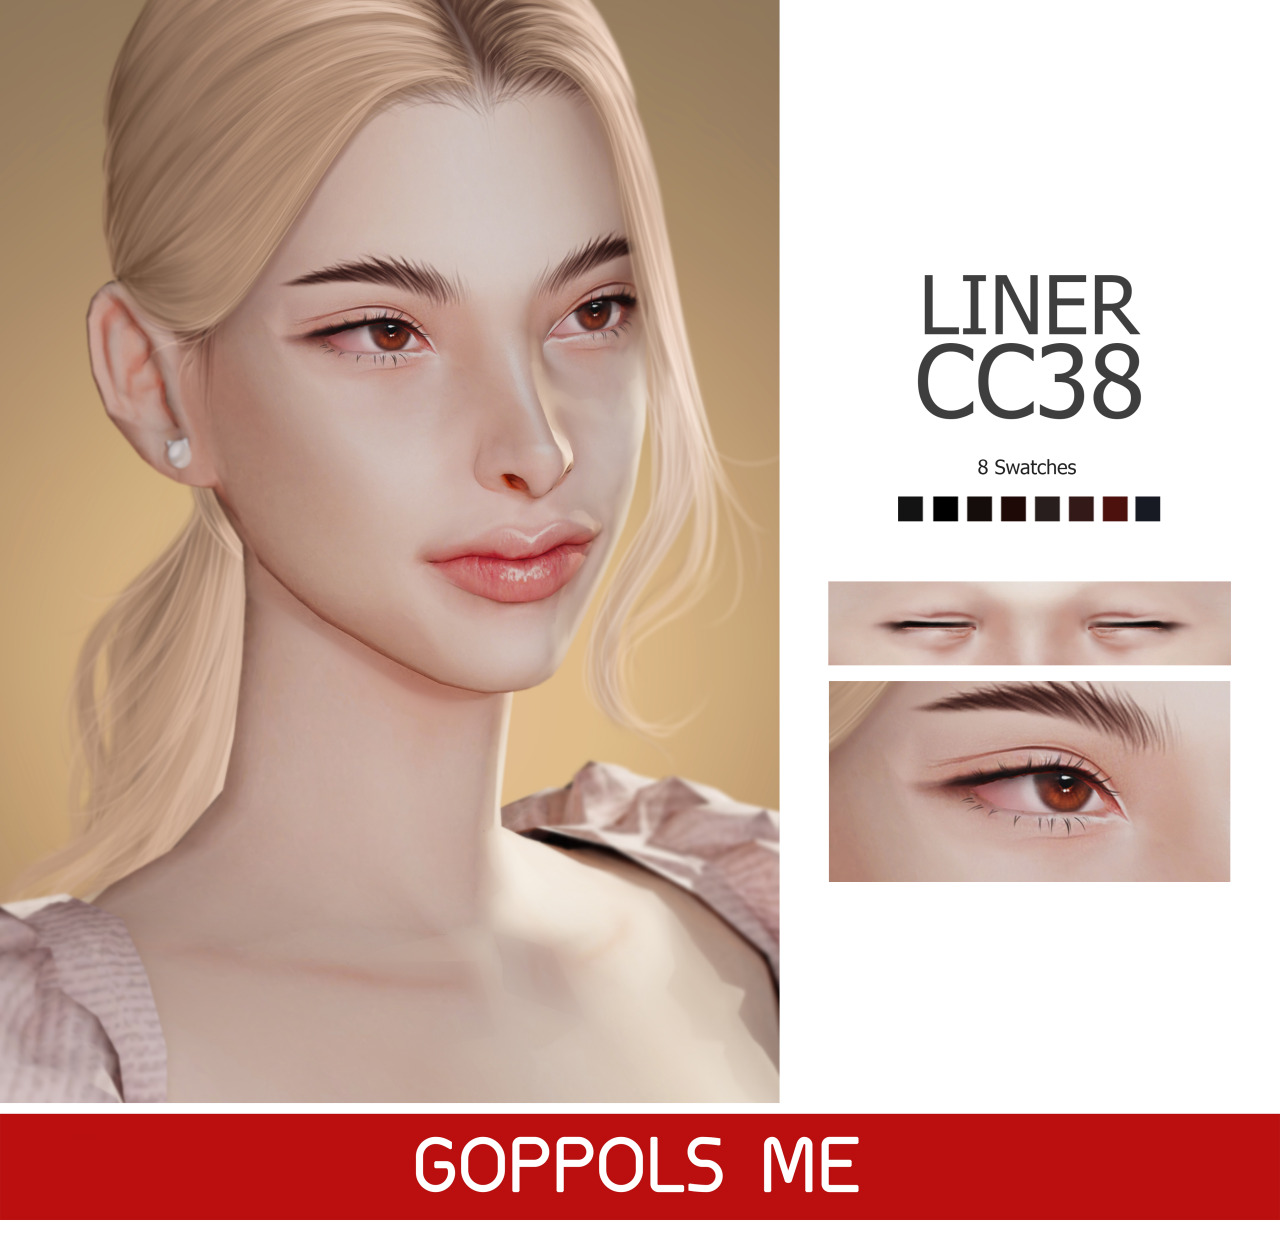 GPME-GOLD Liner cc38DownloadHQ mod compatibleAccess to Exclusive GOPPOLSME Patreon onlyThank for support me  ❤  Thanks for all CC creators ❤Hope you like it .Please don’t re-upload #goppolsme#thesims4#sims4cc#sims4ccfinds#sims4liner#s4cc#s4ccfinds#s4liner